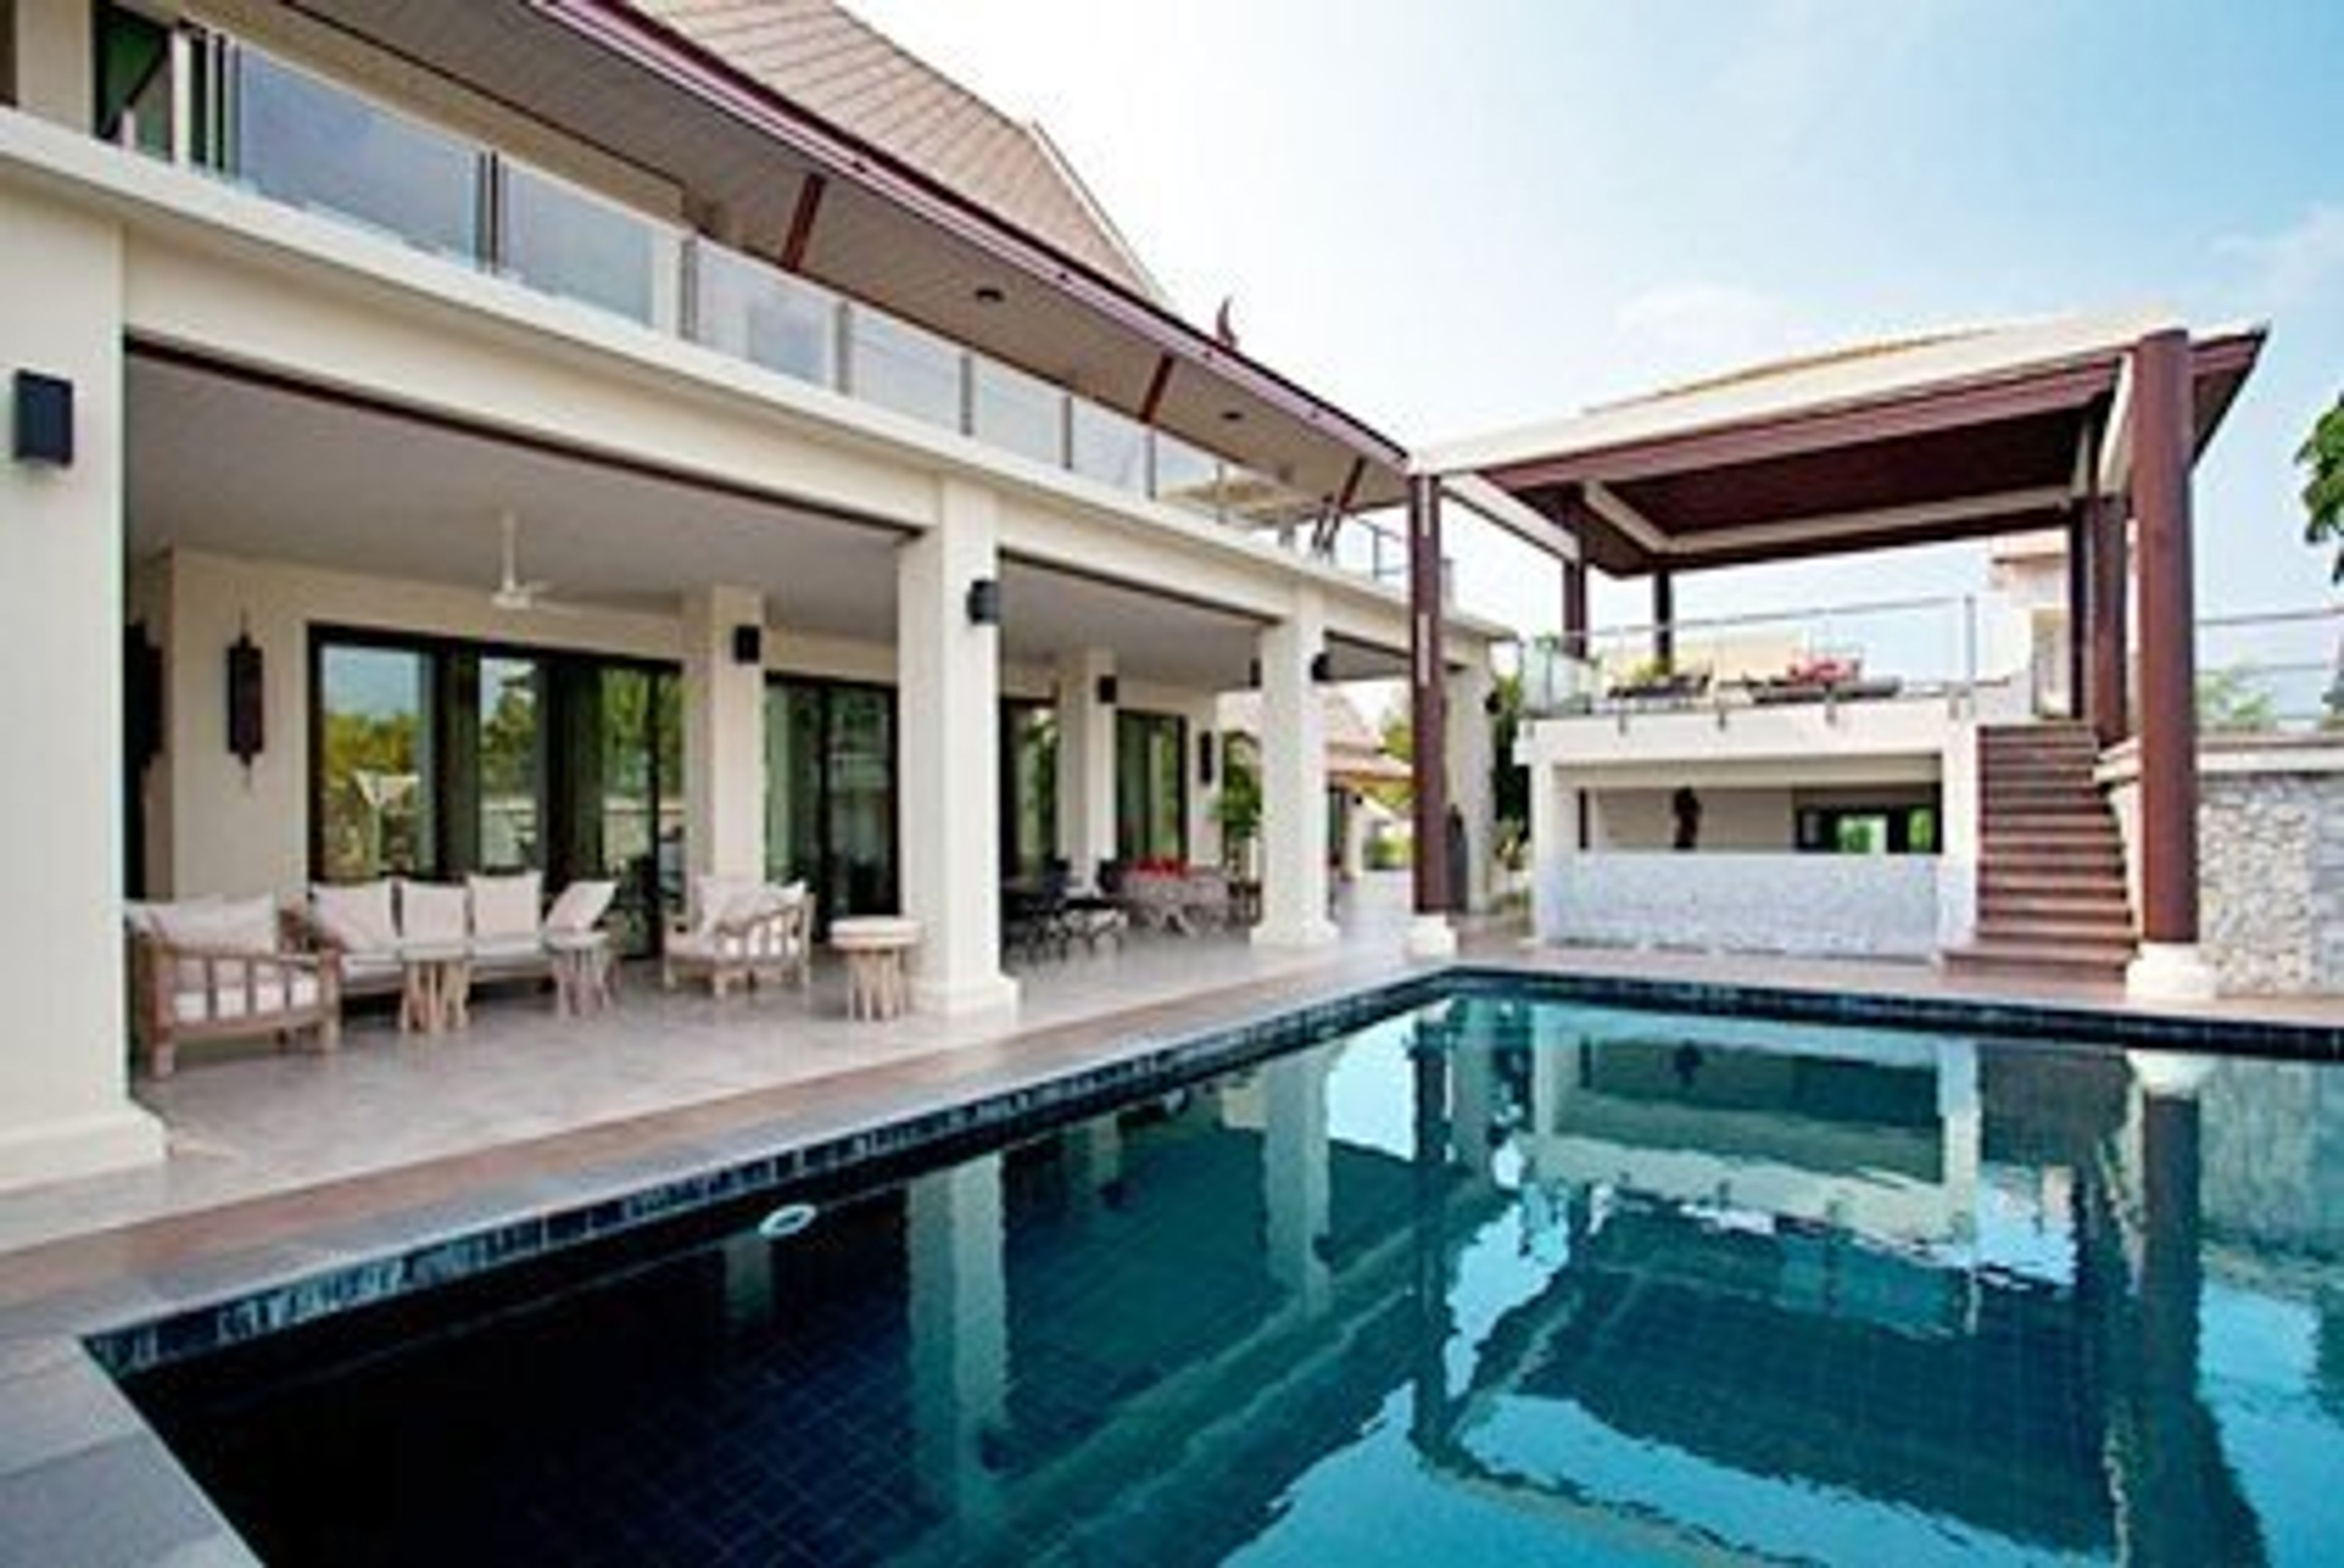 Pool Area and Patio's